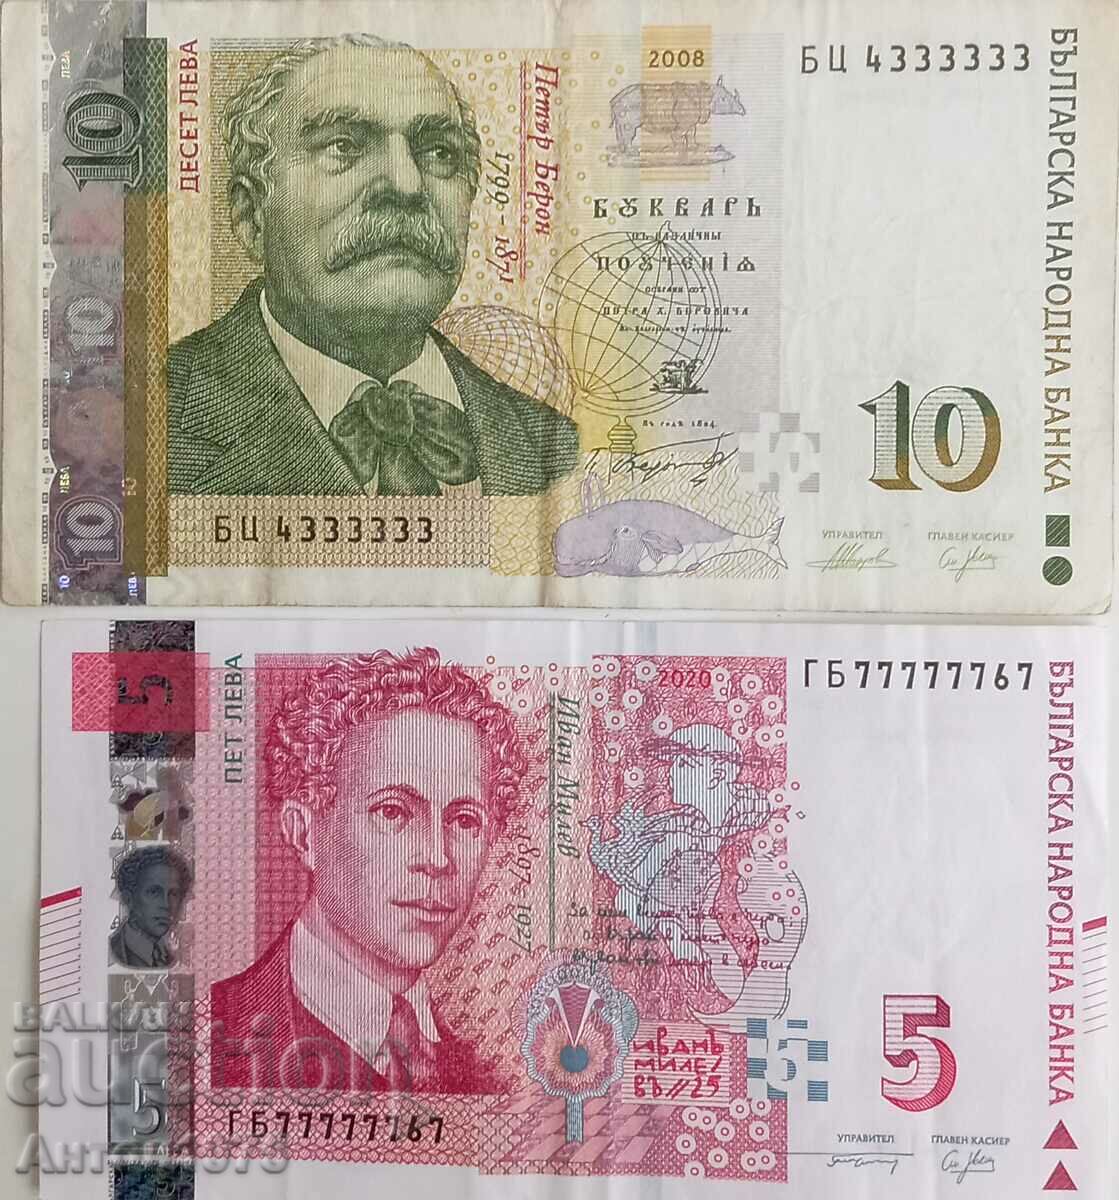 Collector's banknotes